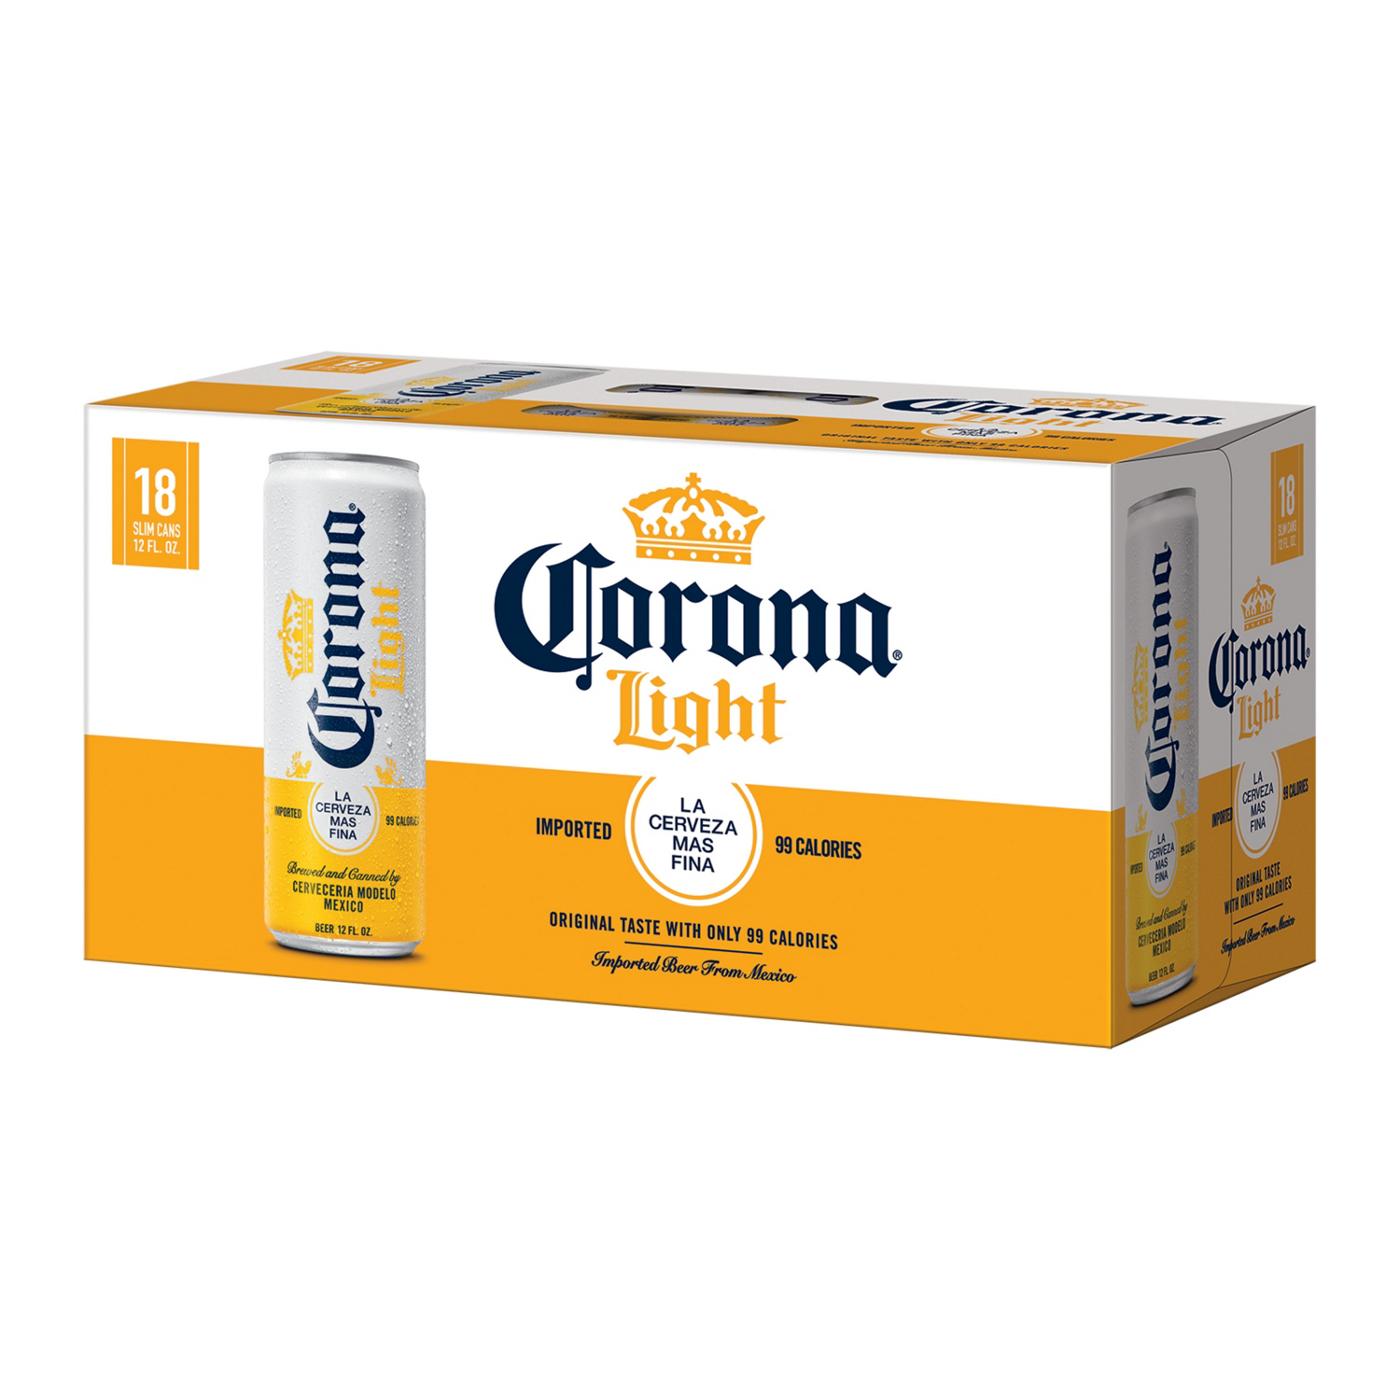 Corona Light Mexican Lager Import Light Beer 12 oz Cans, 18 pk; image 2 of 9